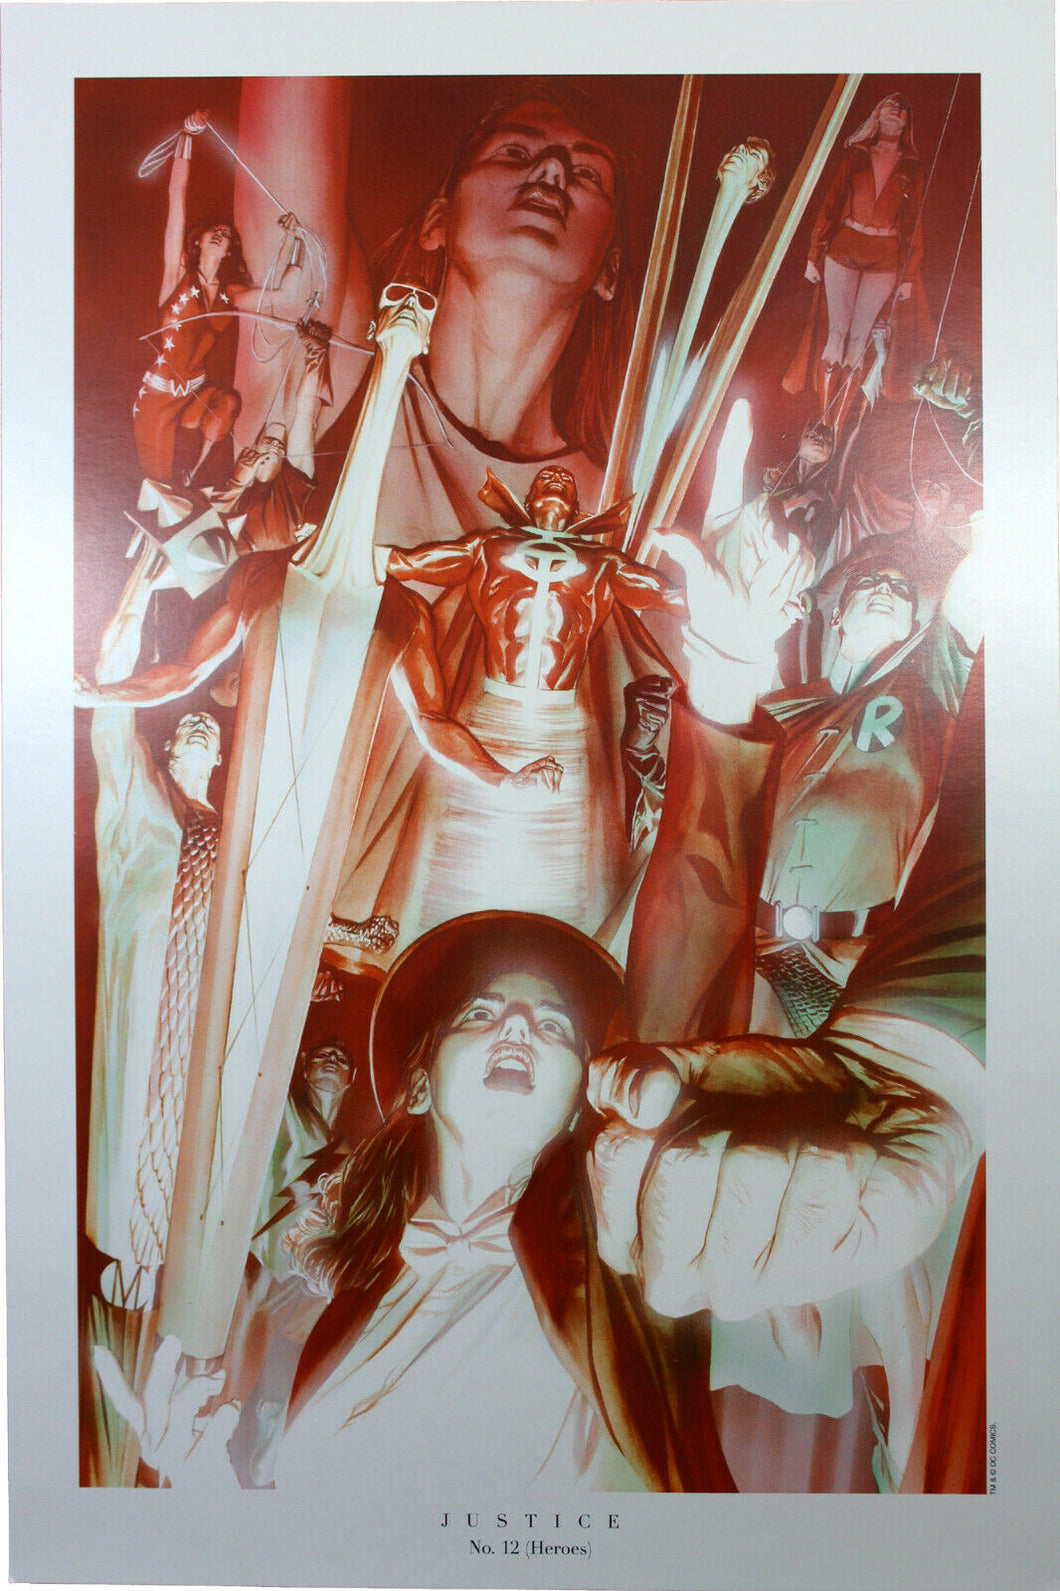 JUSTICE #12 (HEROES) ART PRINT by Alex Ross ~ 9